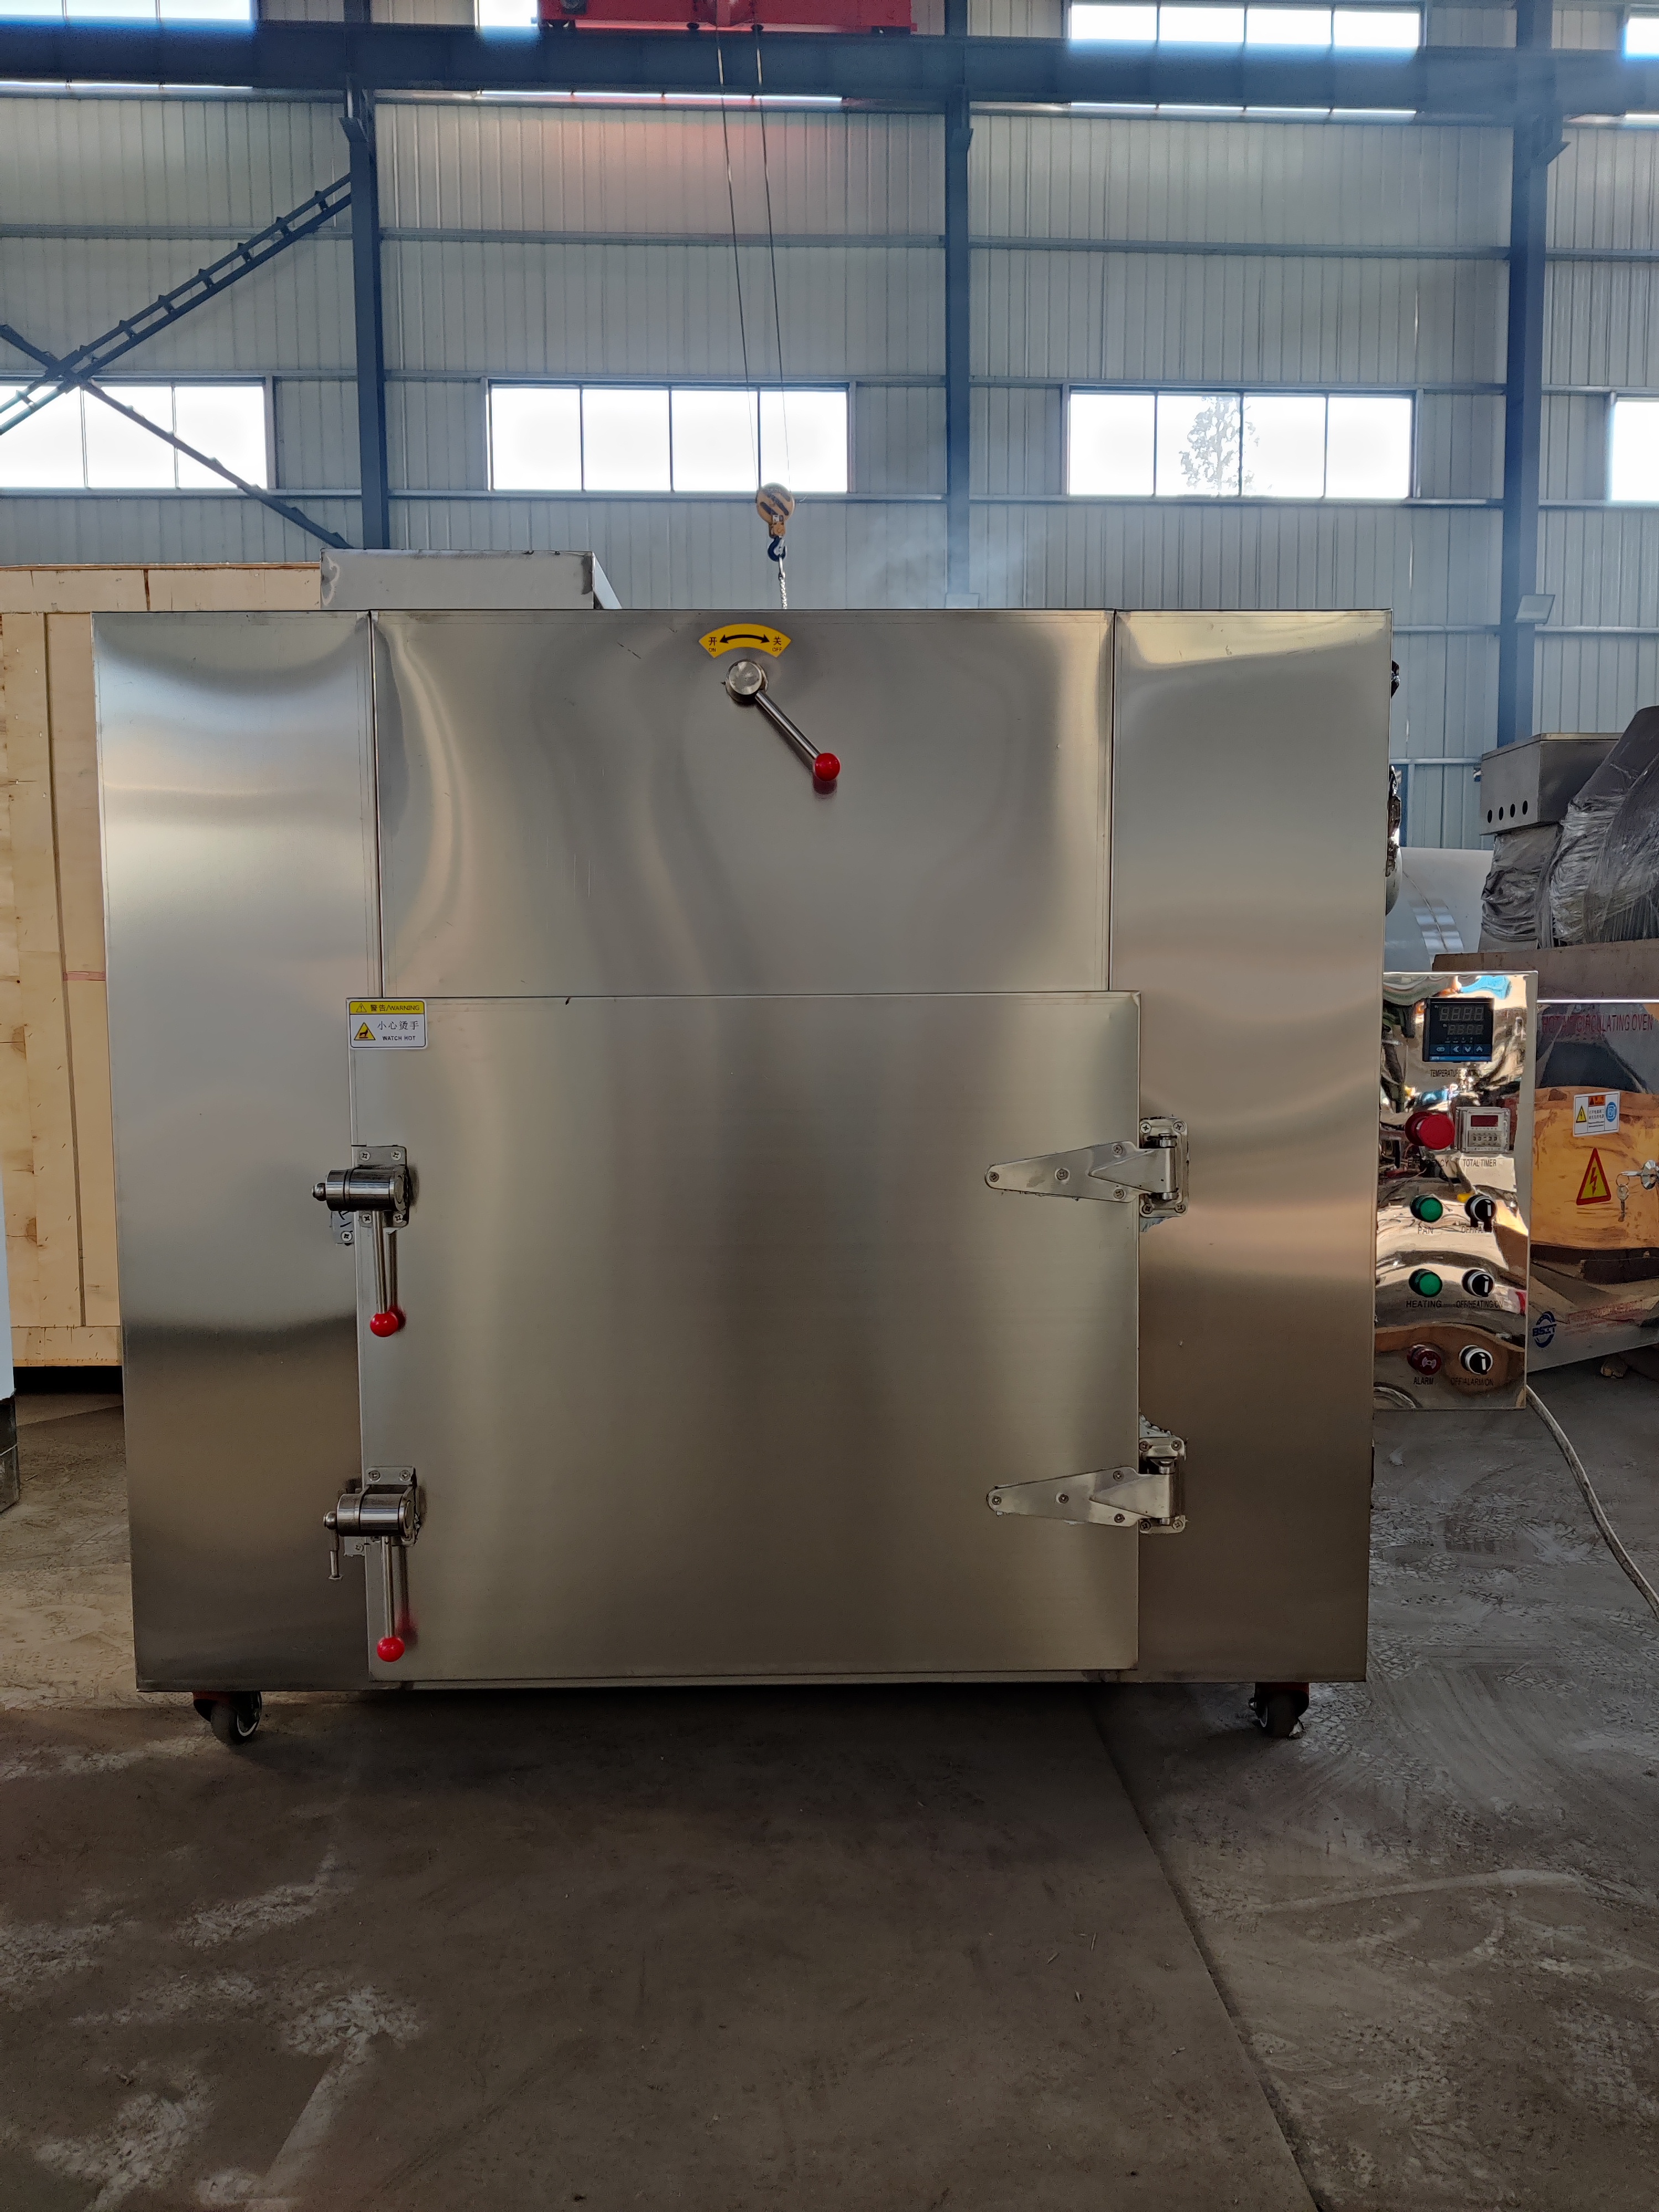 BSIT SUS304 GMP standards Pharmaceutical Hot Air Circulation Drying Oven 